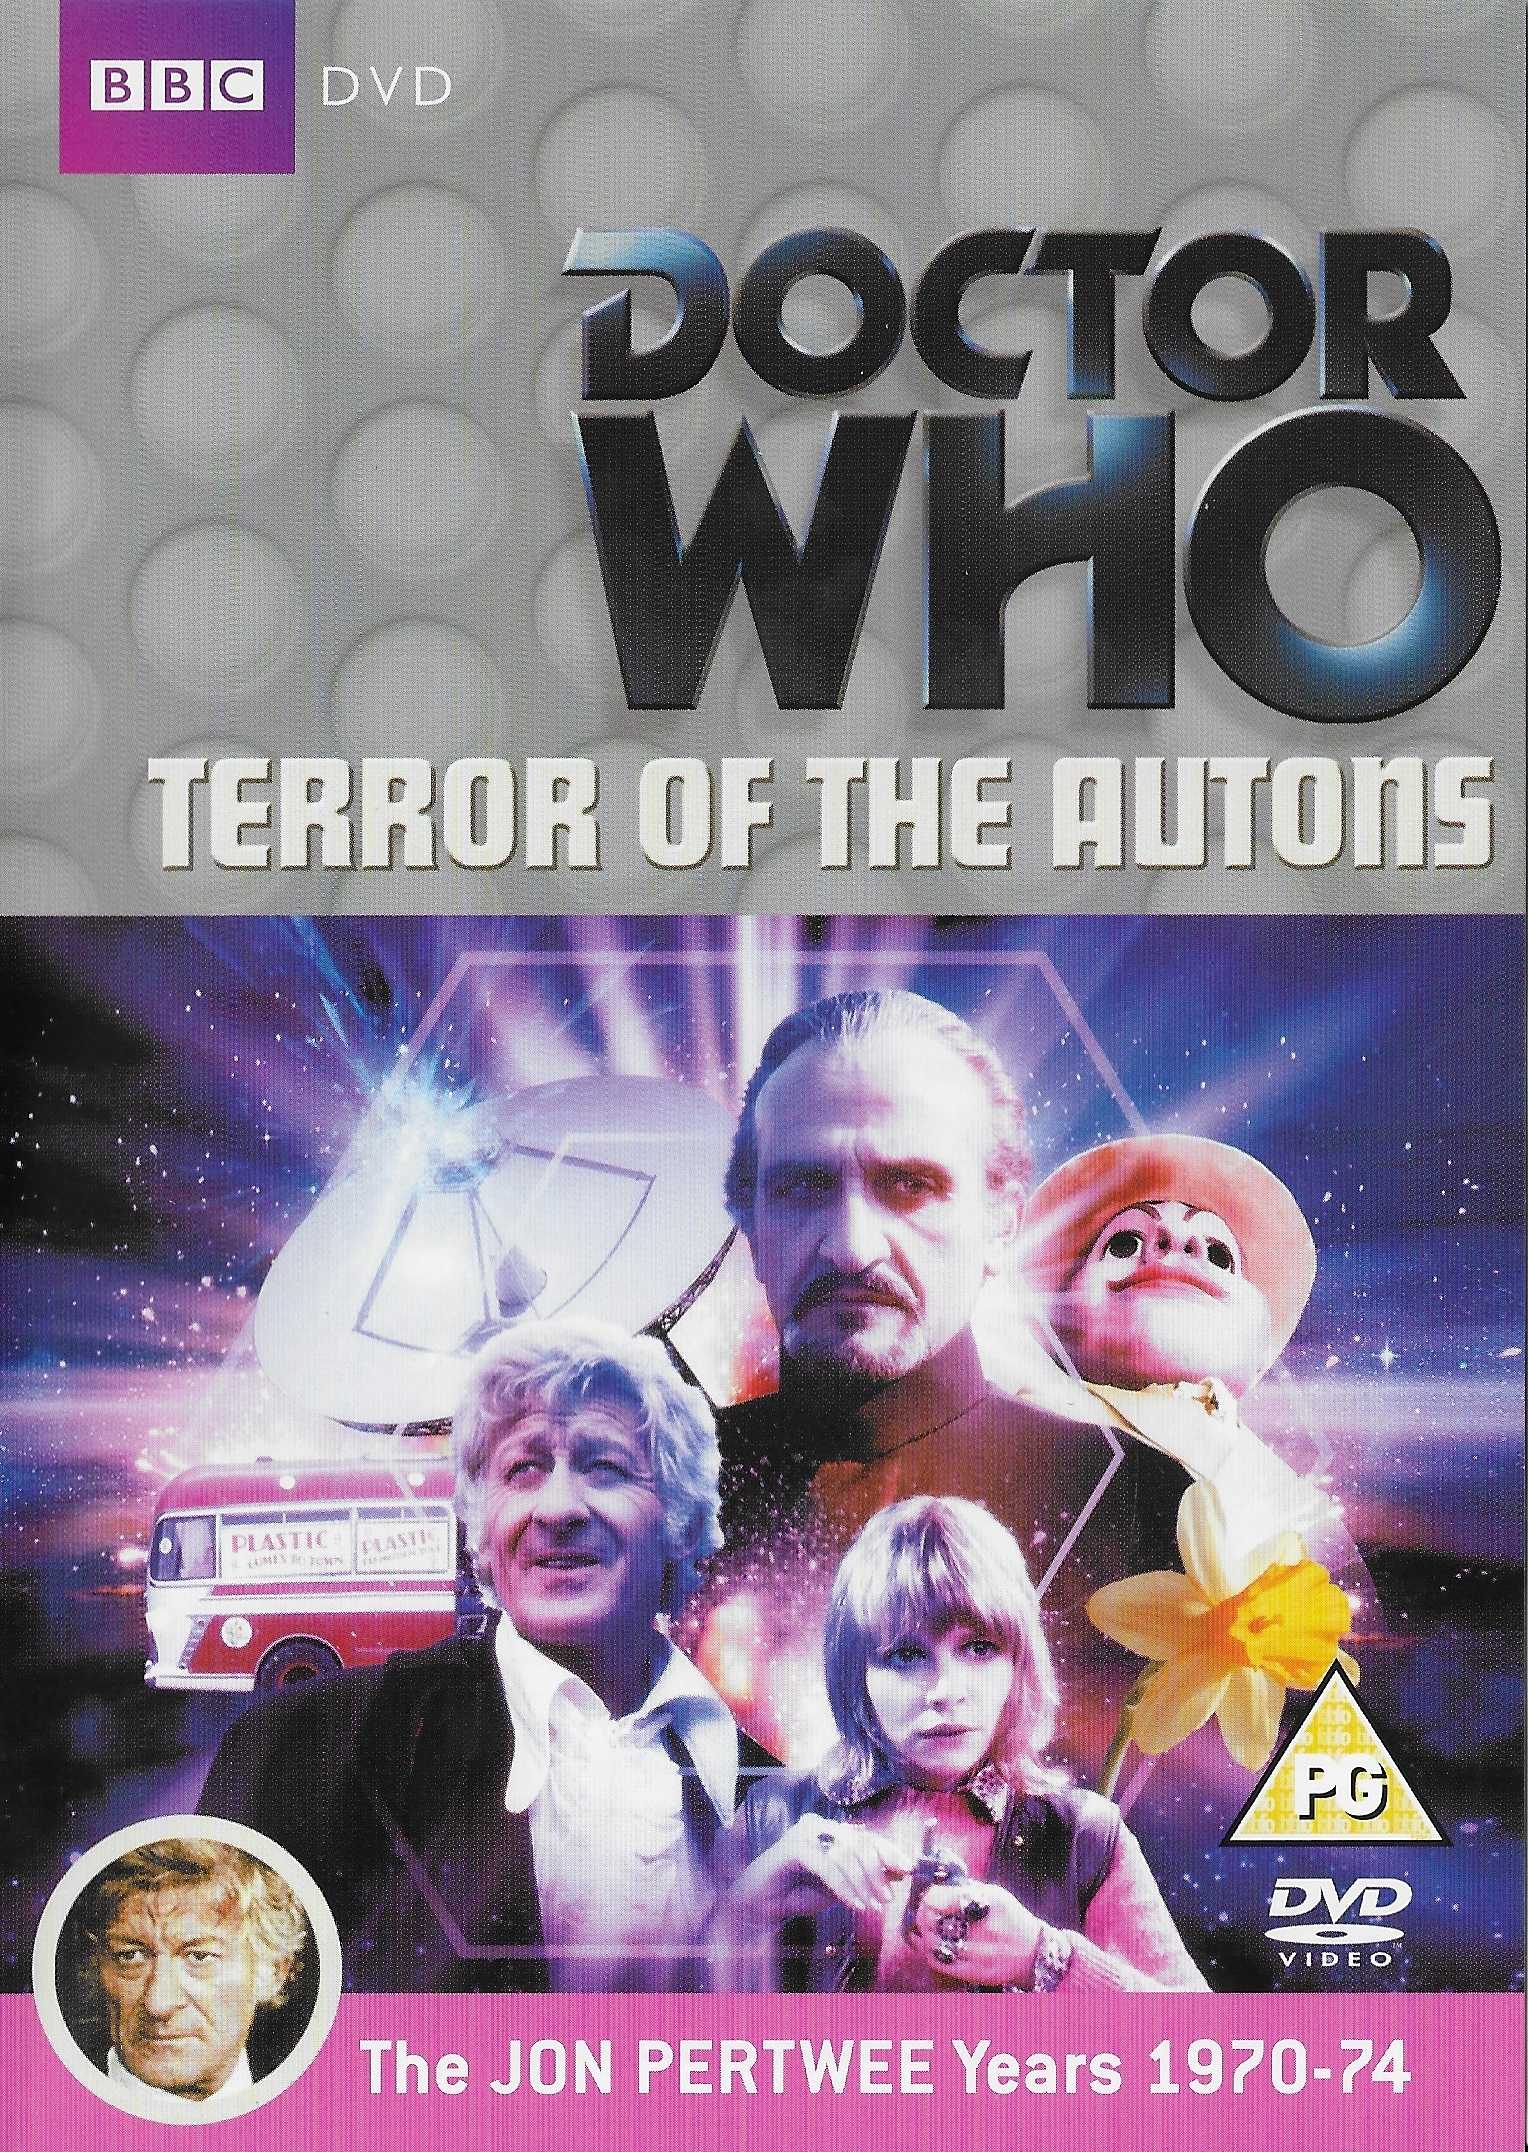 Picture of BBCDVD 3135B Doctor Who - Terror of the Autons by artist Robert Holmes from the BBC dvds - Records and Tapes library